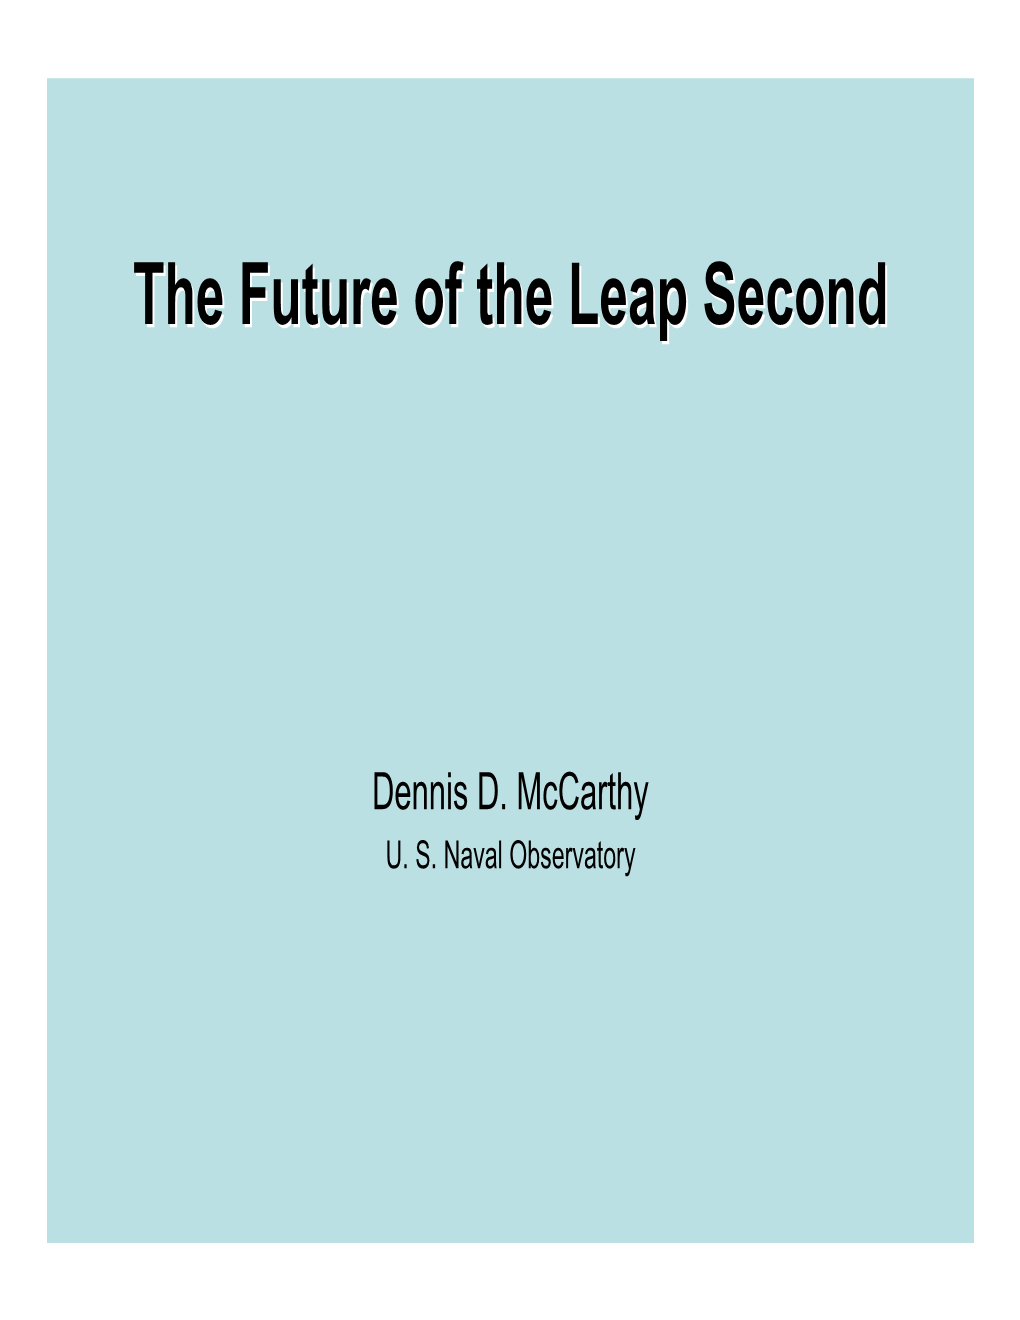 The Future of the Leap Second